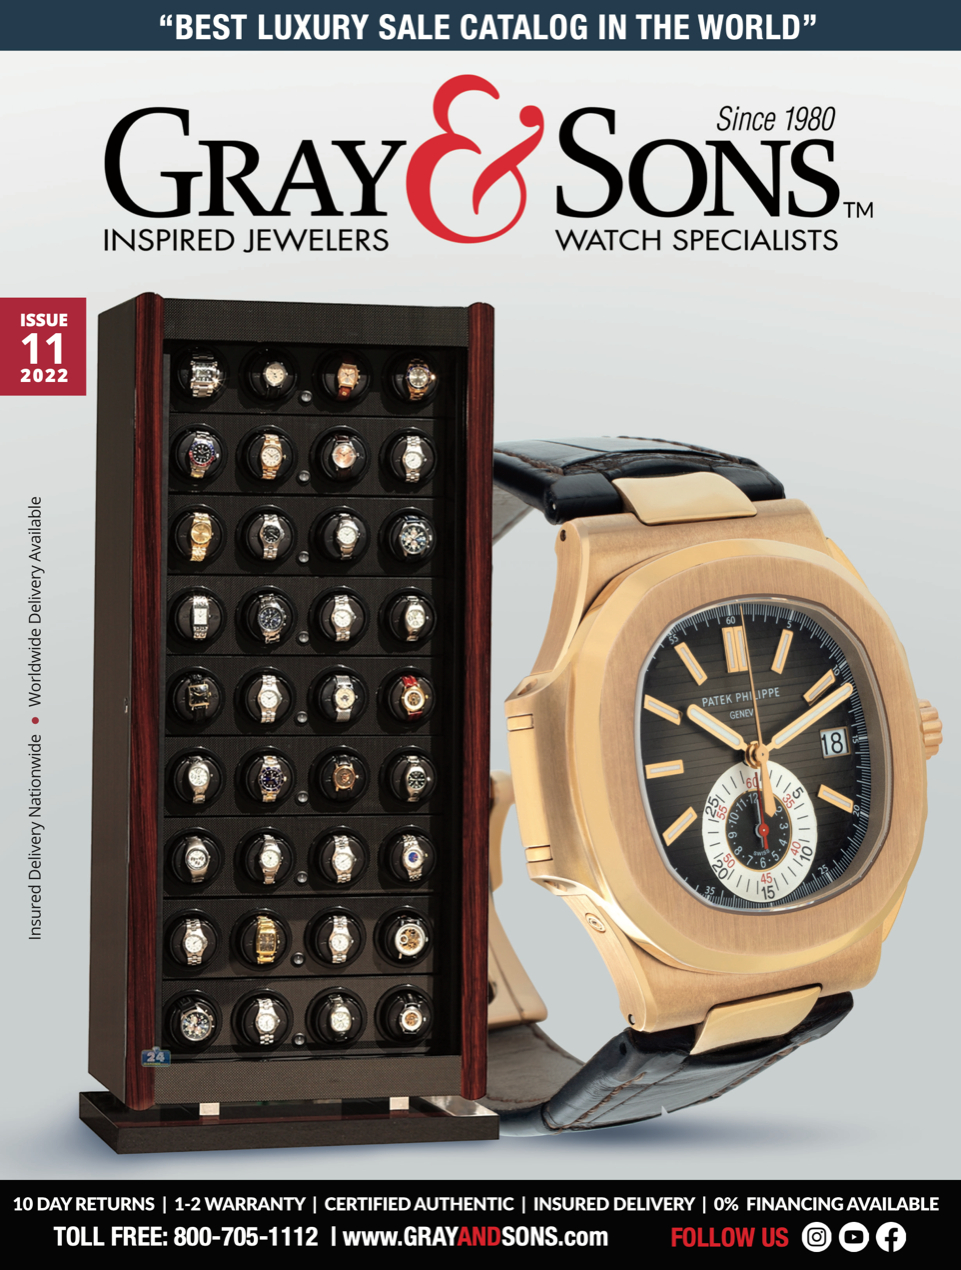 Orbita Watch Winders and  Gray and Sons Jewelers work hand in hand to provide the best customer experience to fine watch collectors